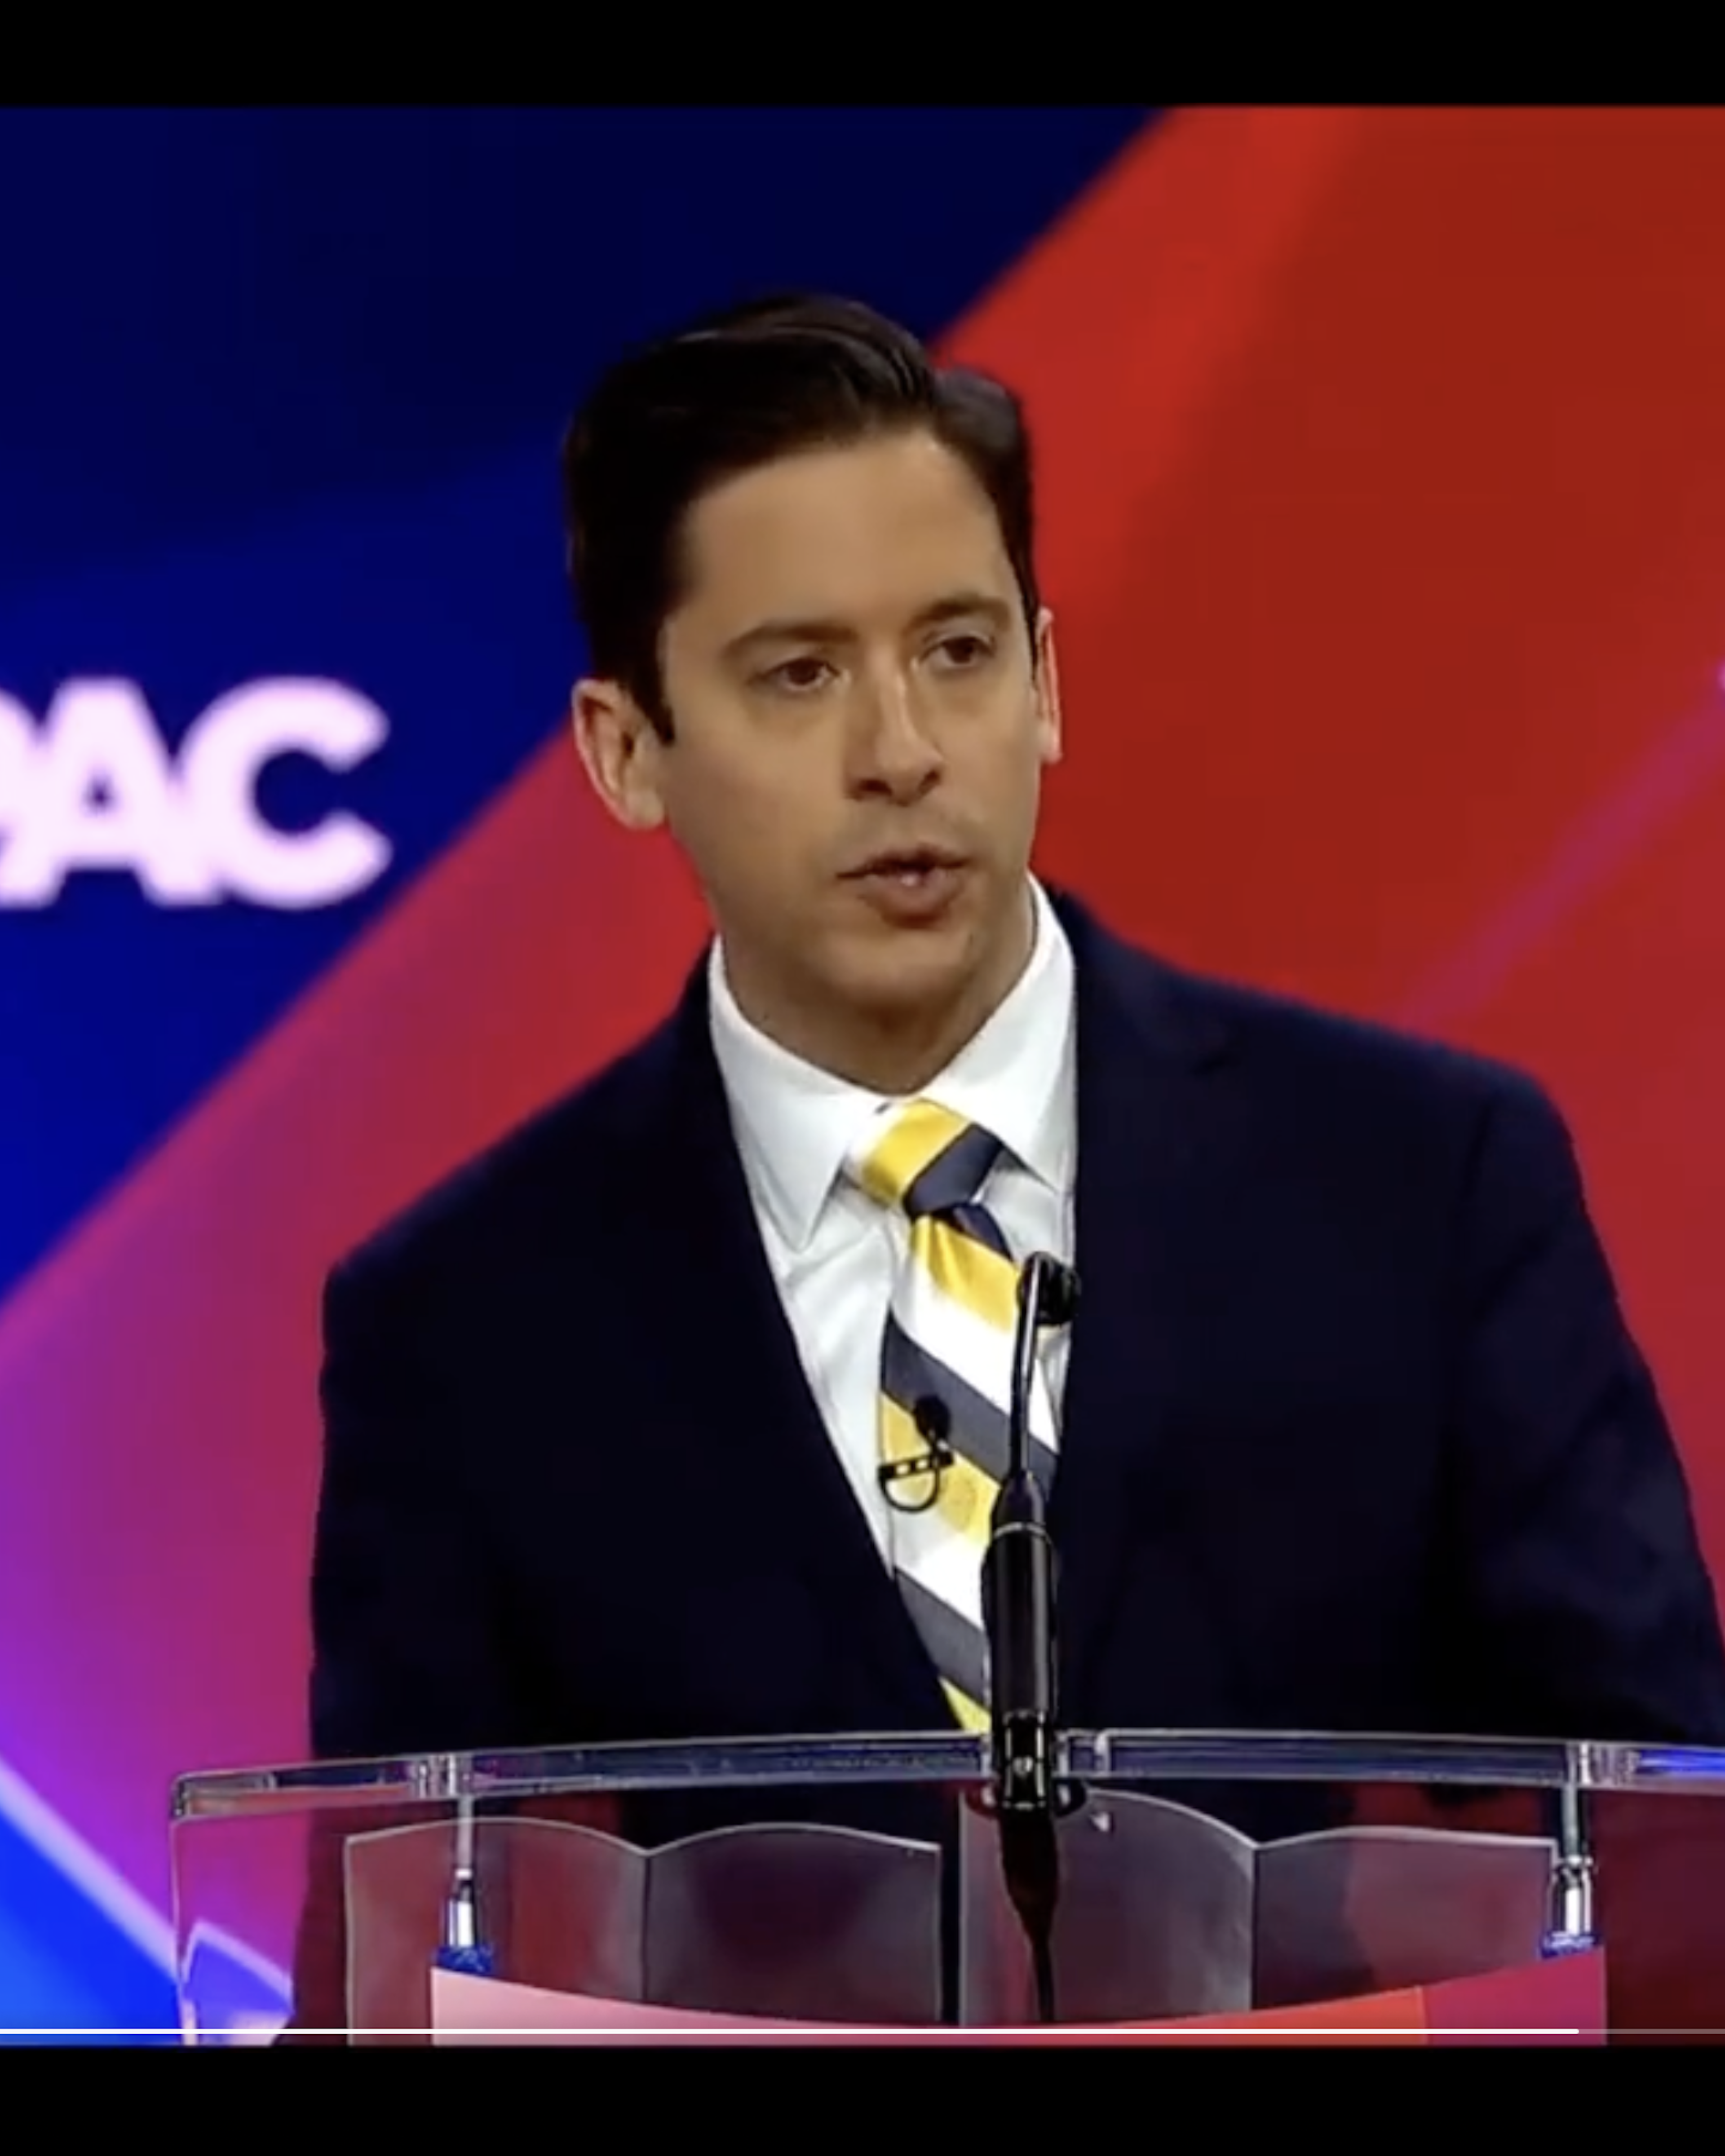 Michael Knowles spoke at CPAC